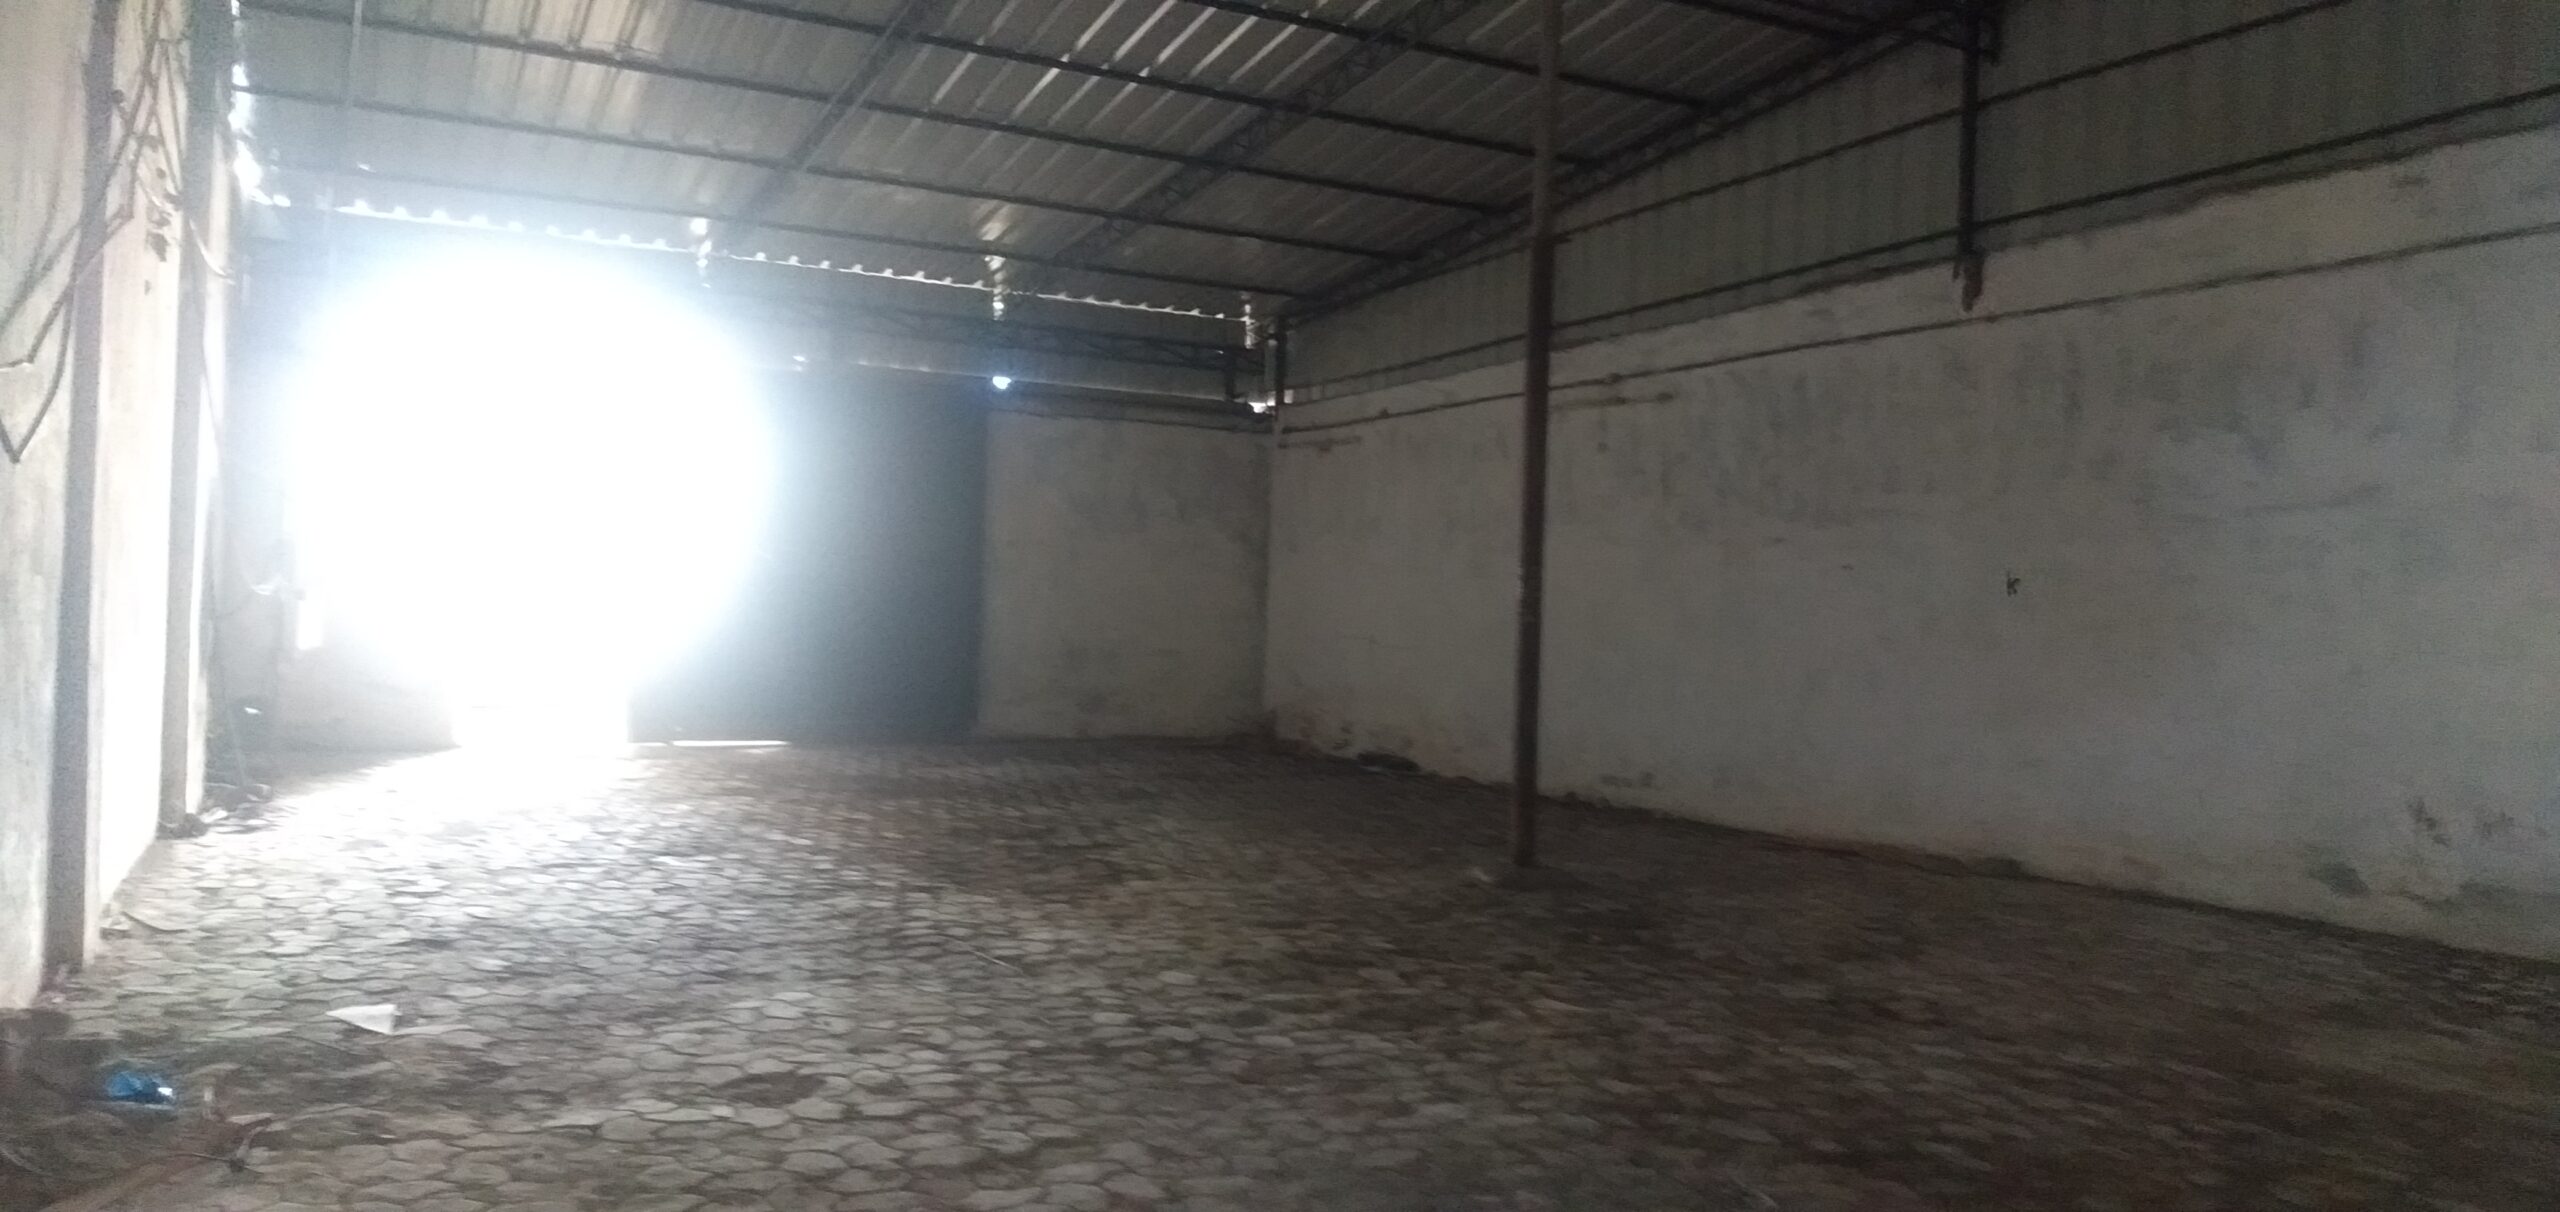 COMMERCIAL PROPERTY/WAREHOUSE/APARTMENT/OFFICE SPACE FOR RENT